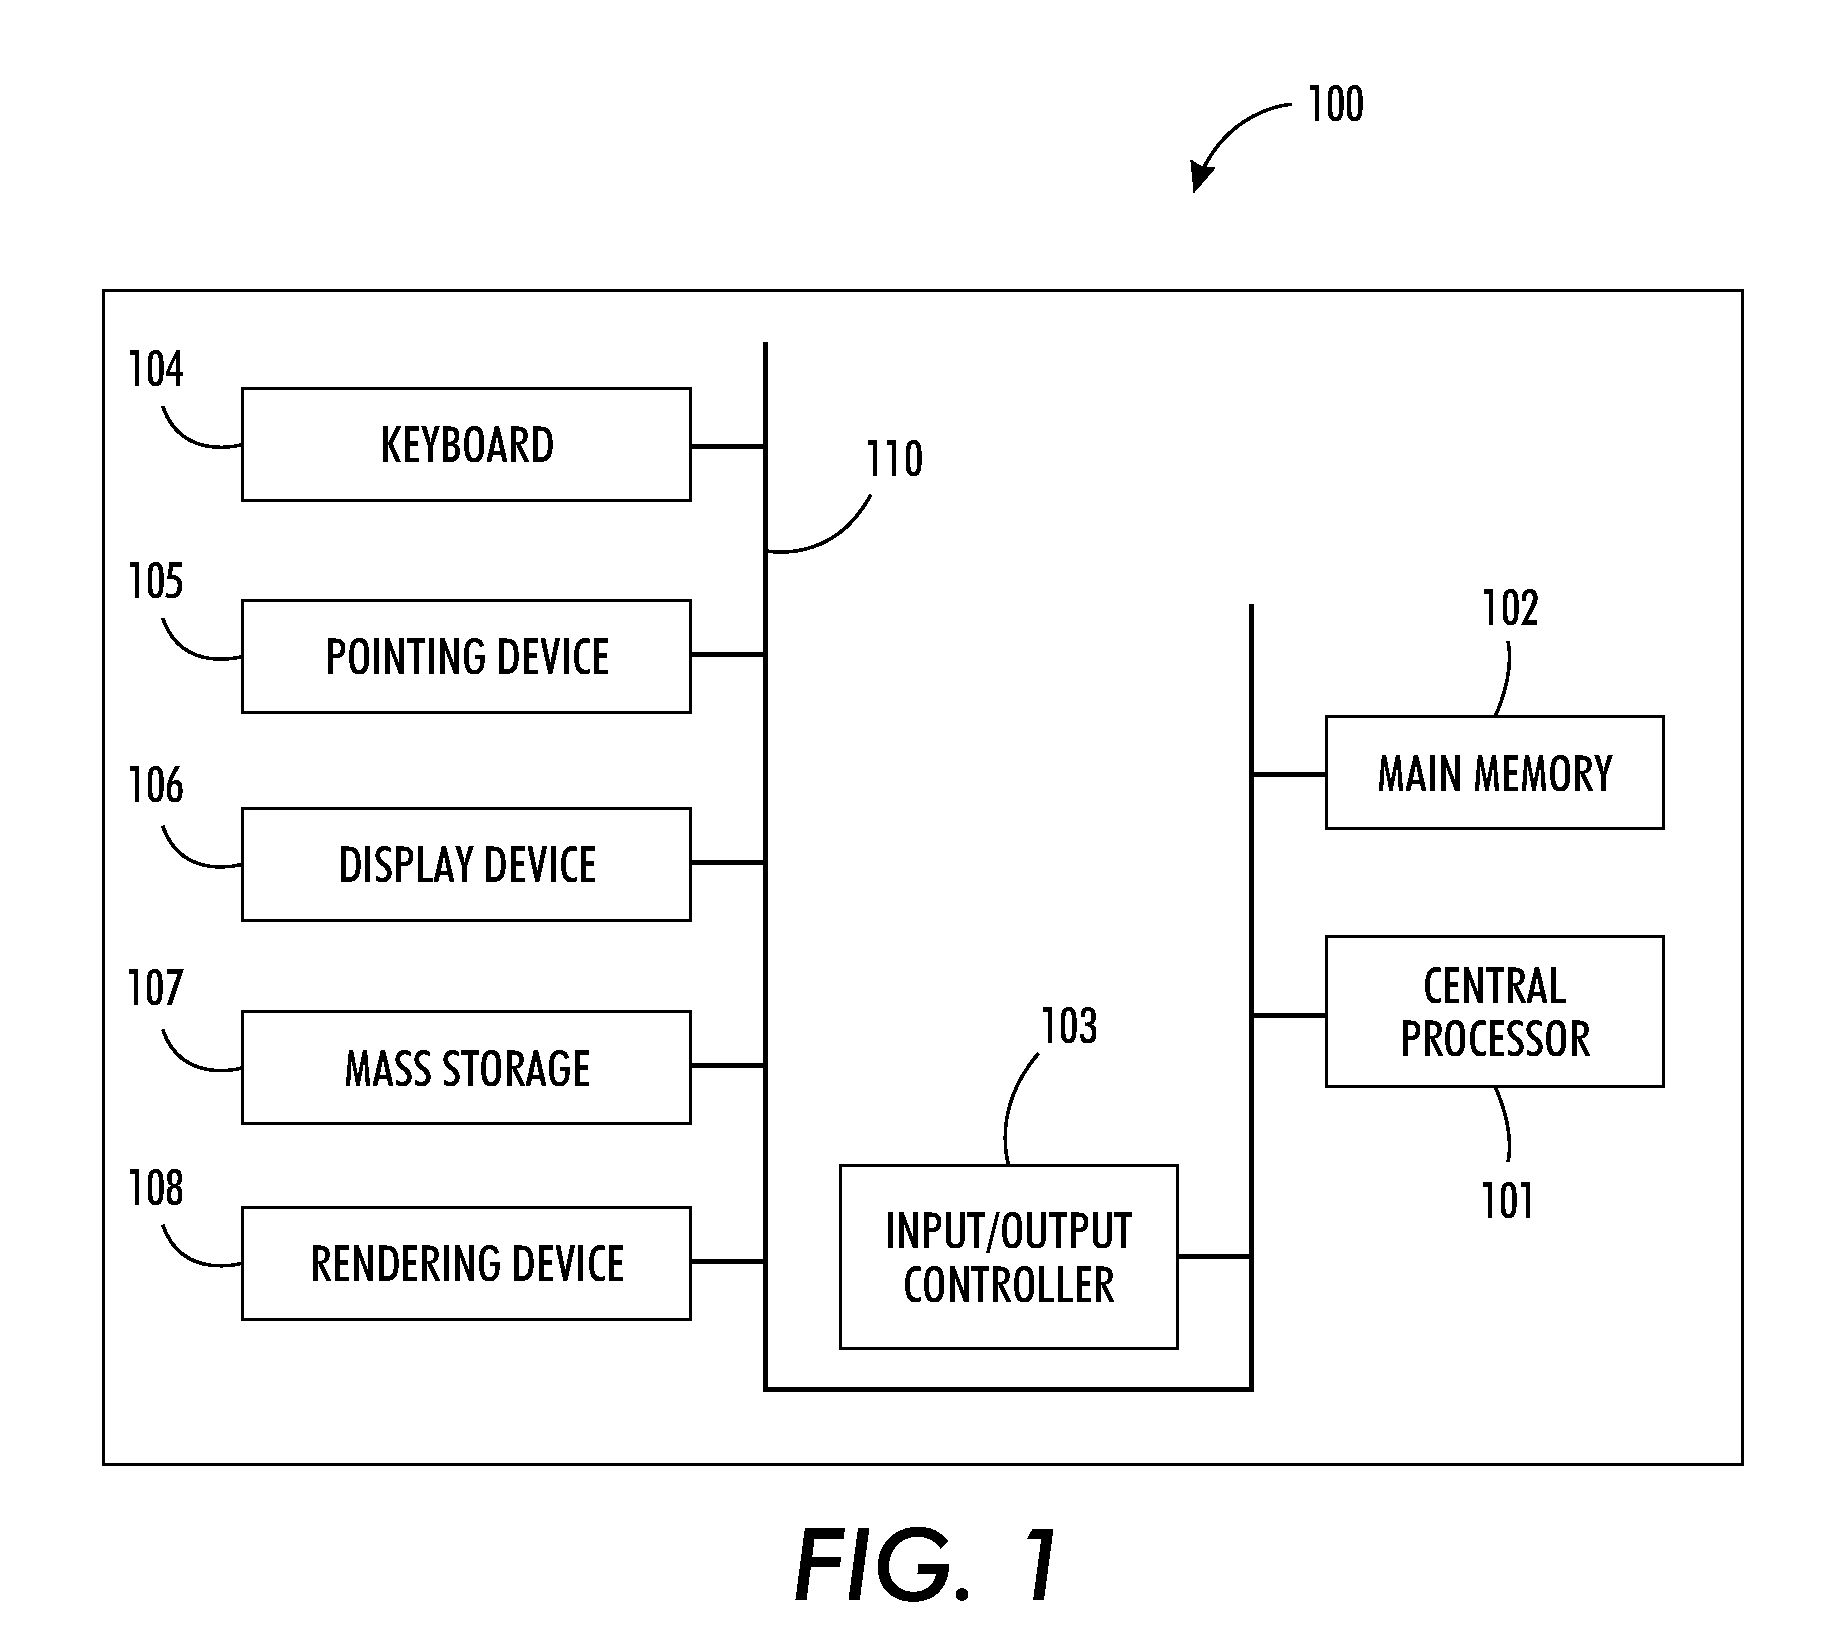 Method and system for managing service intervals for related components